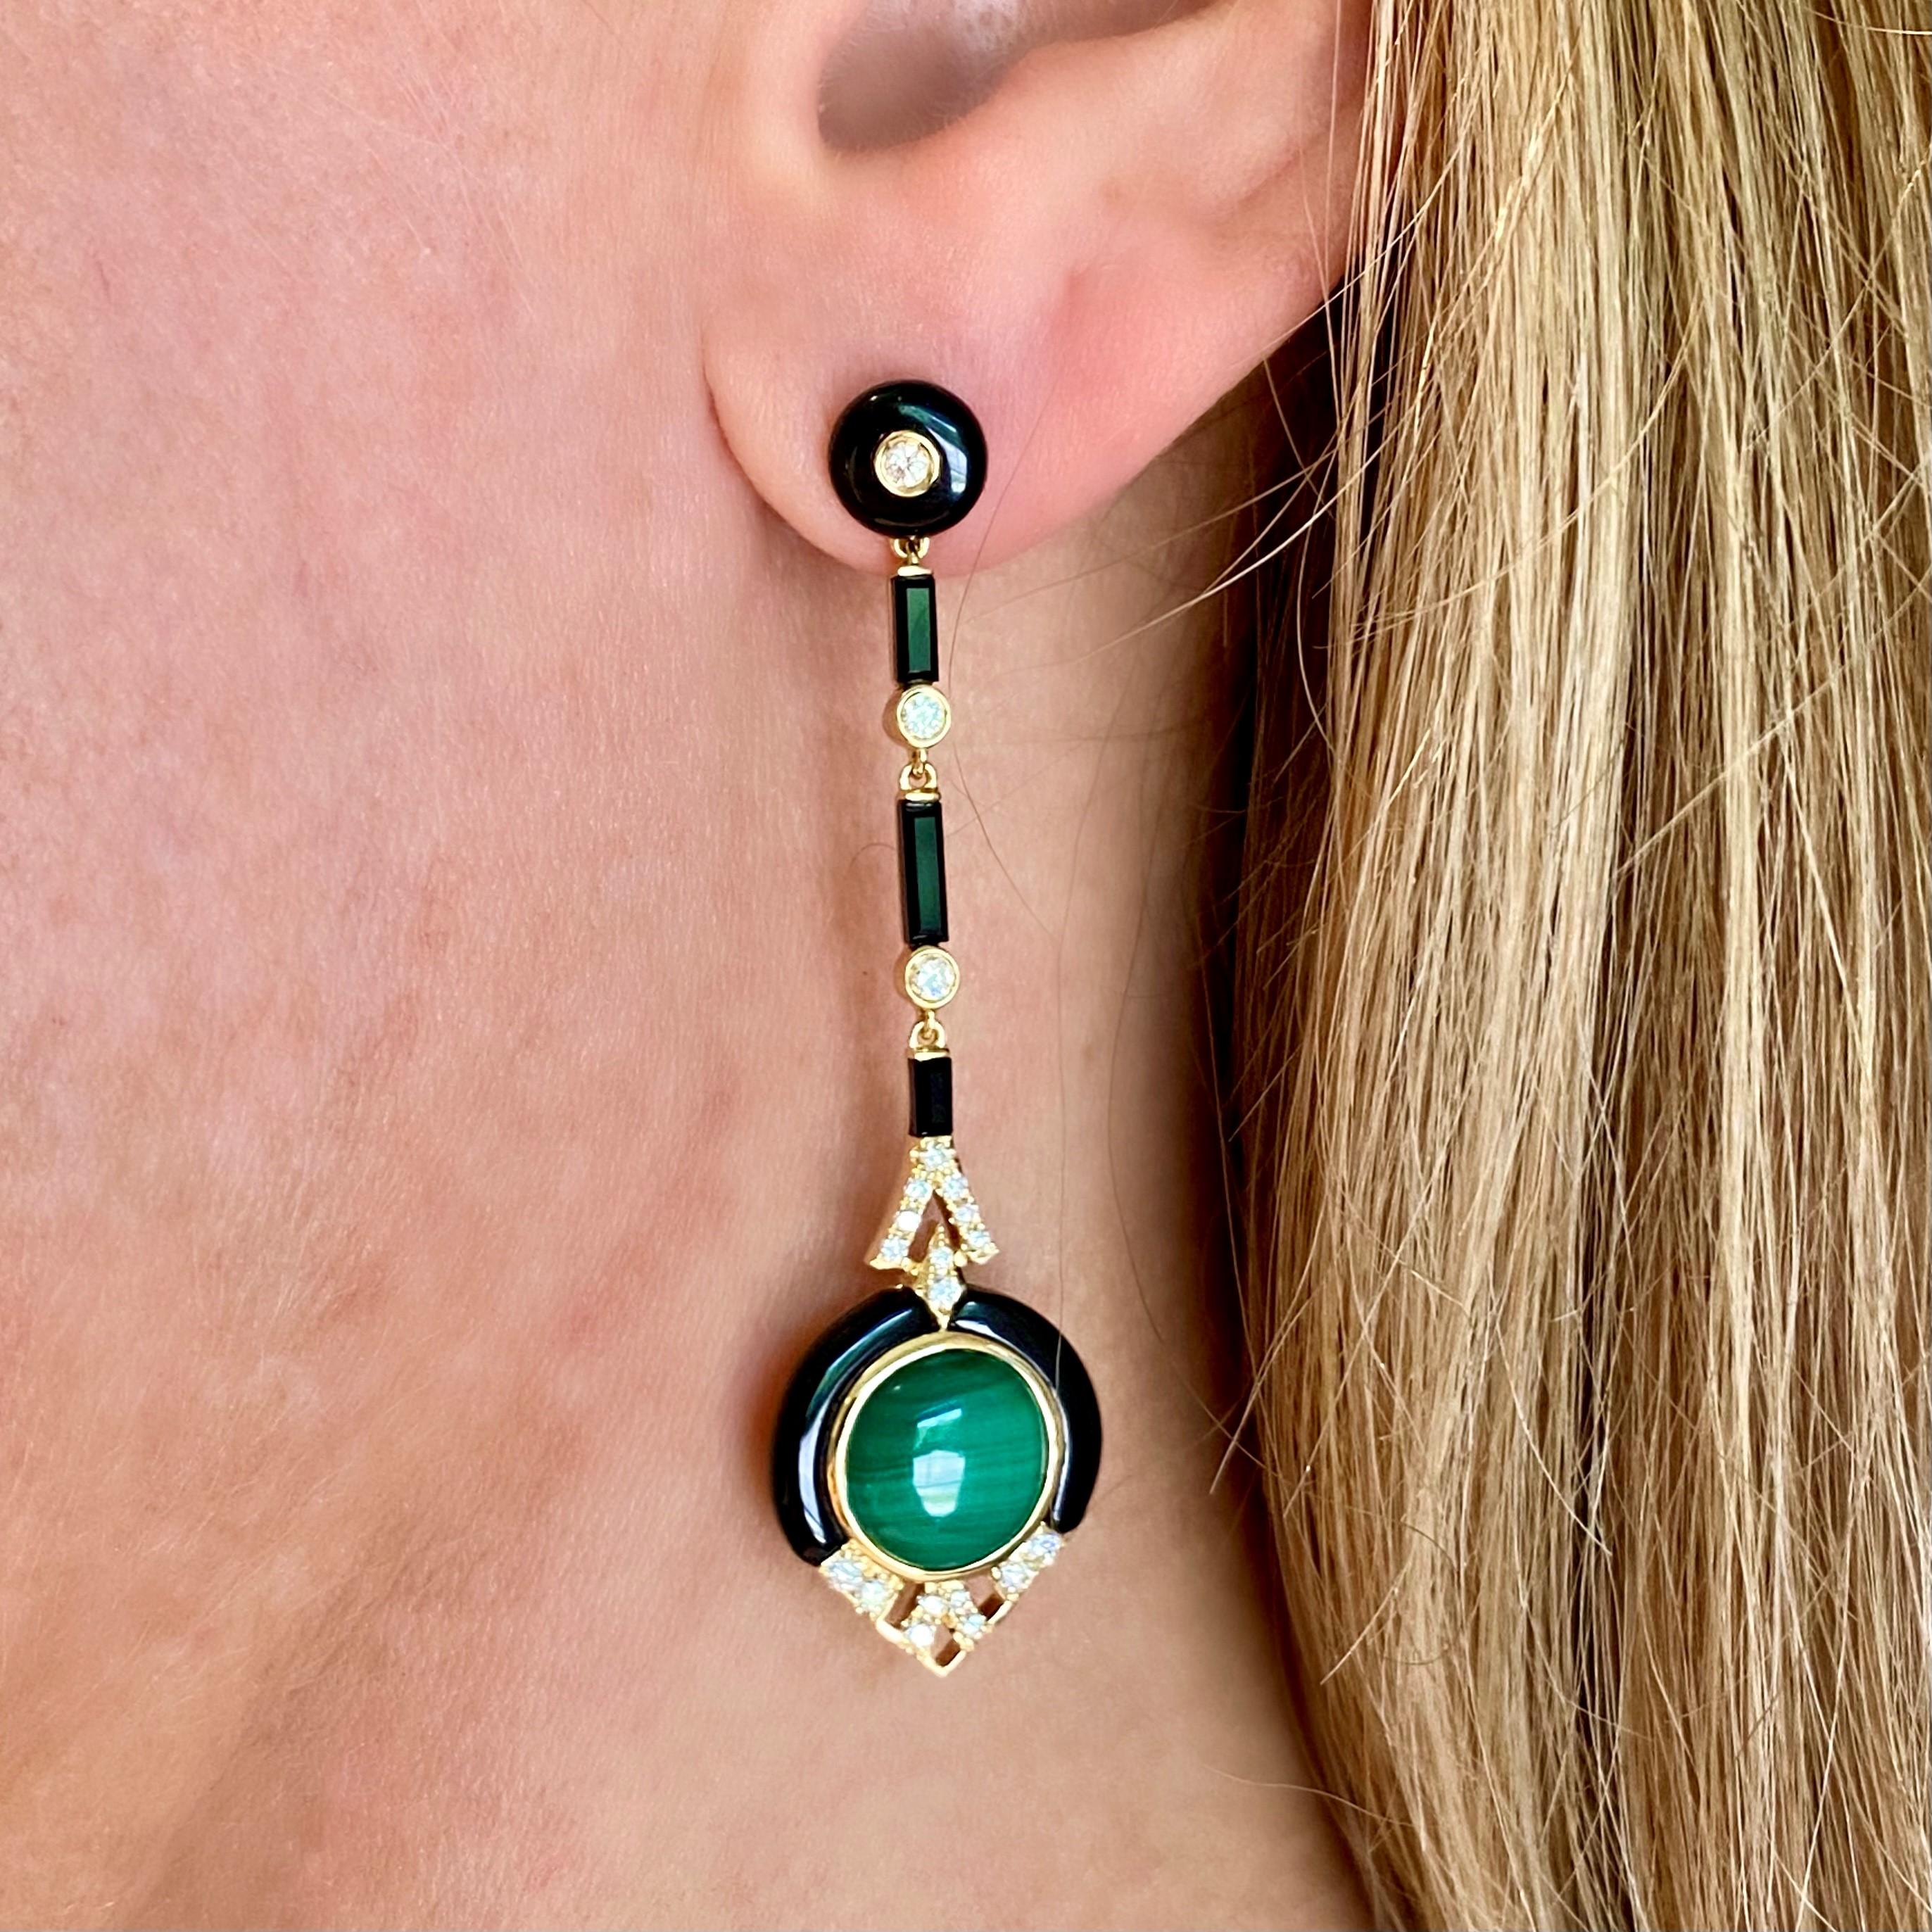 Art Deco style look in these long drop 18 Karat yellow gold earrings. 
Stunning earring with touches of diamonds.
Earrings have movement. 


Gem info:
9.43 carat total weight Malachite
4.45 cart total weight Black Onyx 
40 round brilliant Diamonds